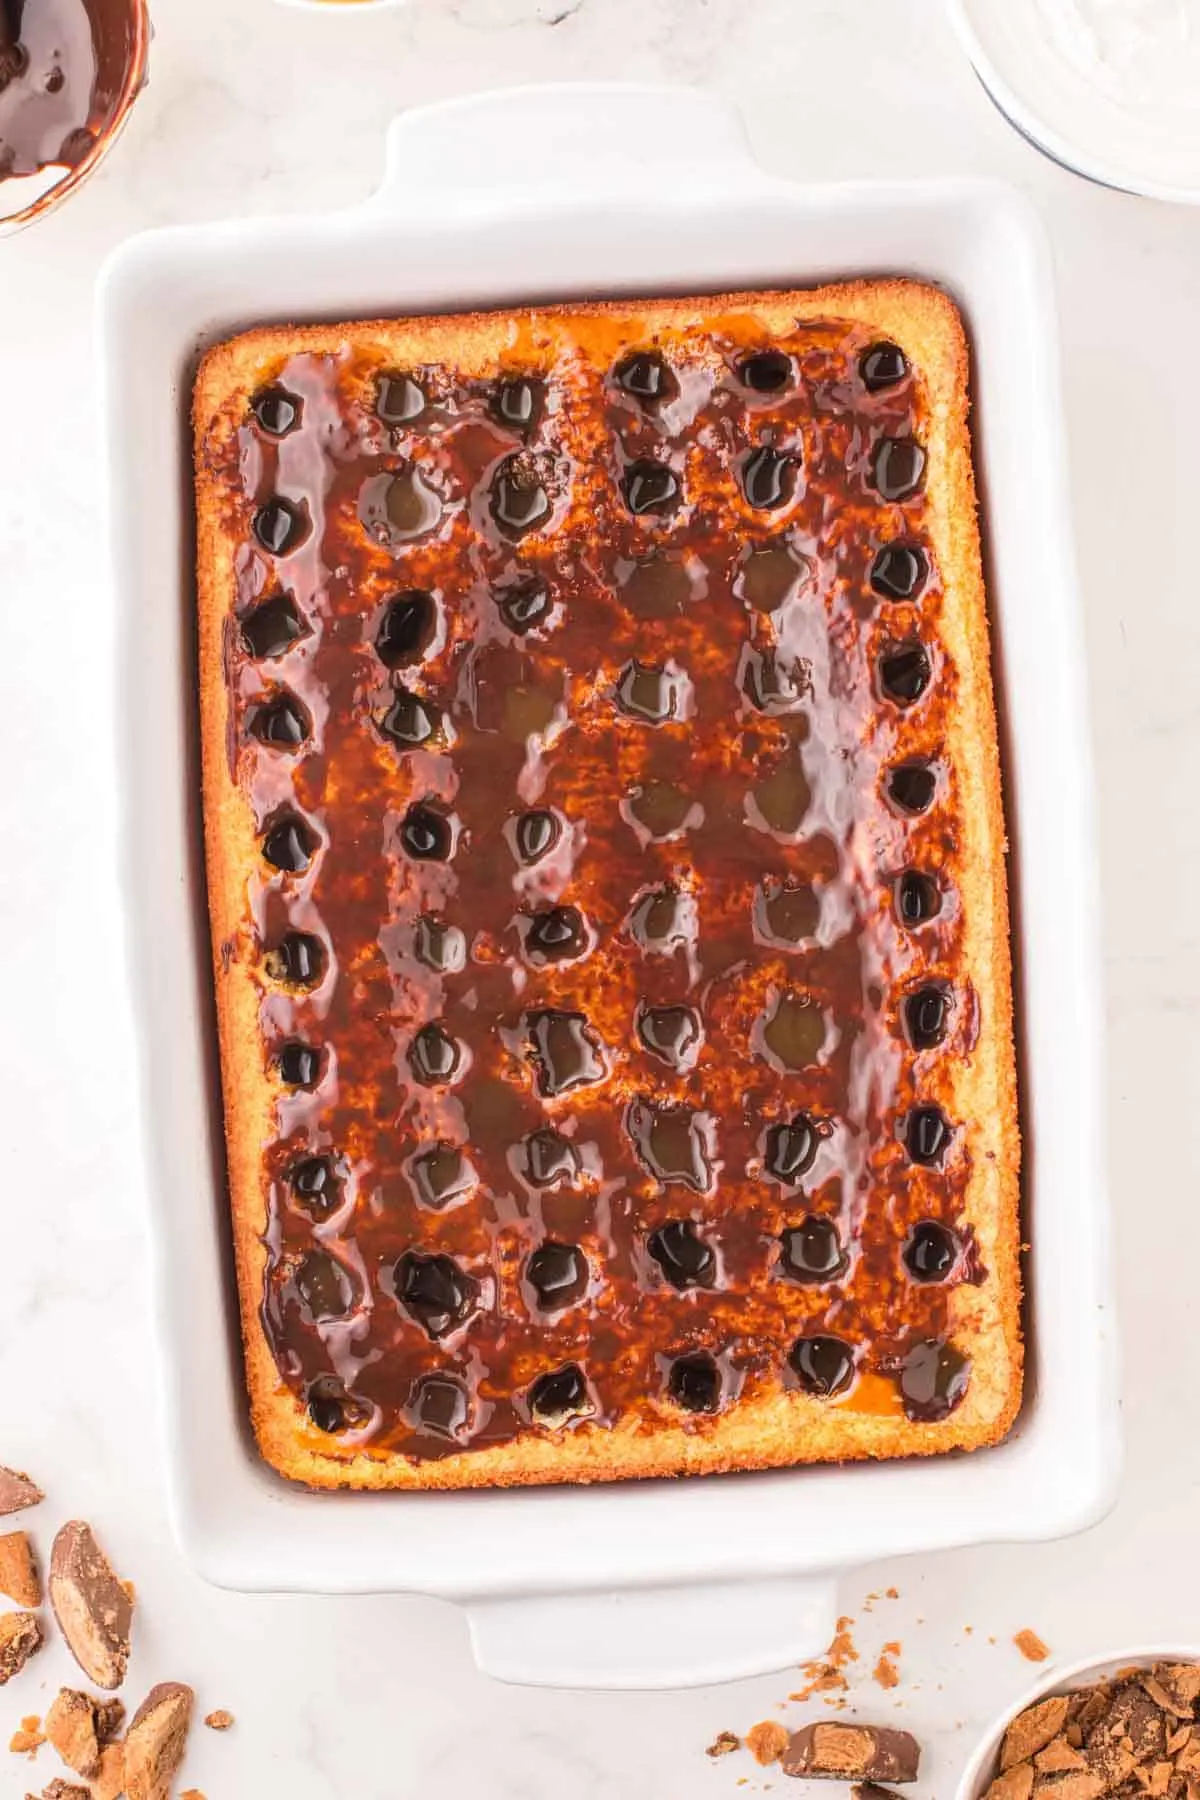 caramel and chocolate sauce poured over cake with rows of holes in it